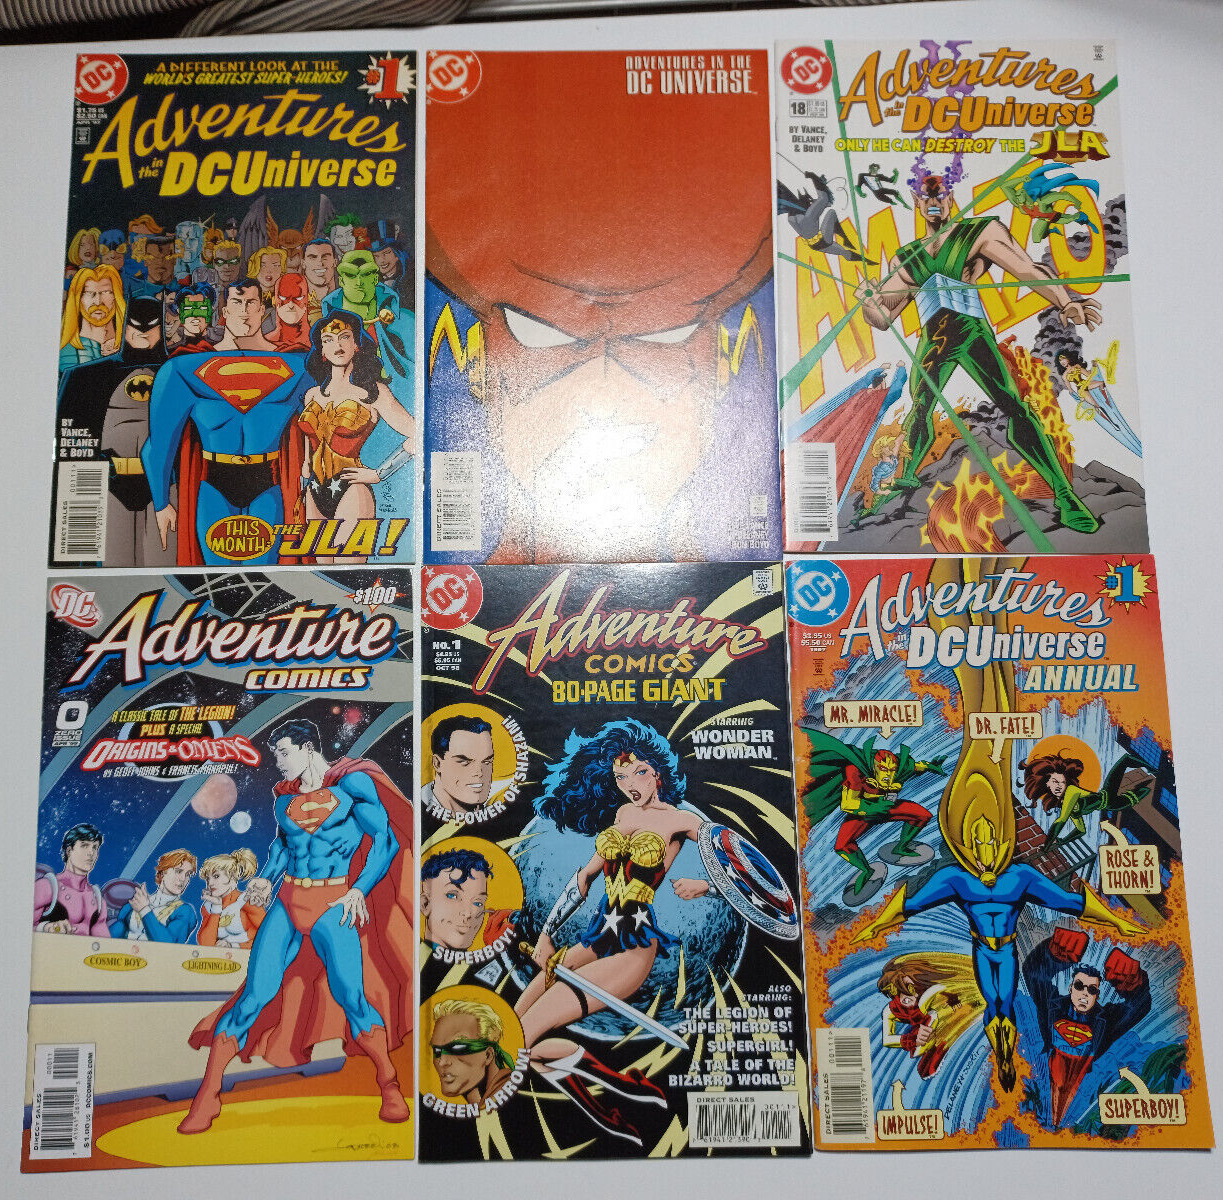 6 Issue Lot - DC Comics Adventures in the DC Universe #1 9 18 80 Page #1 Annual